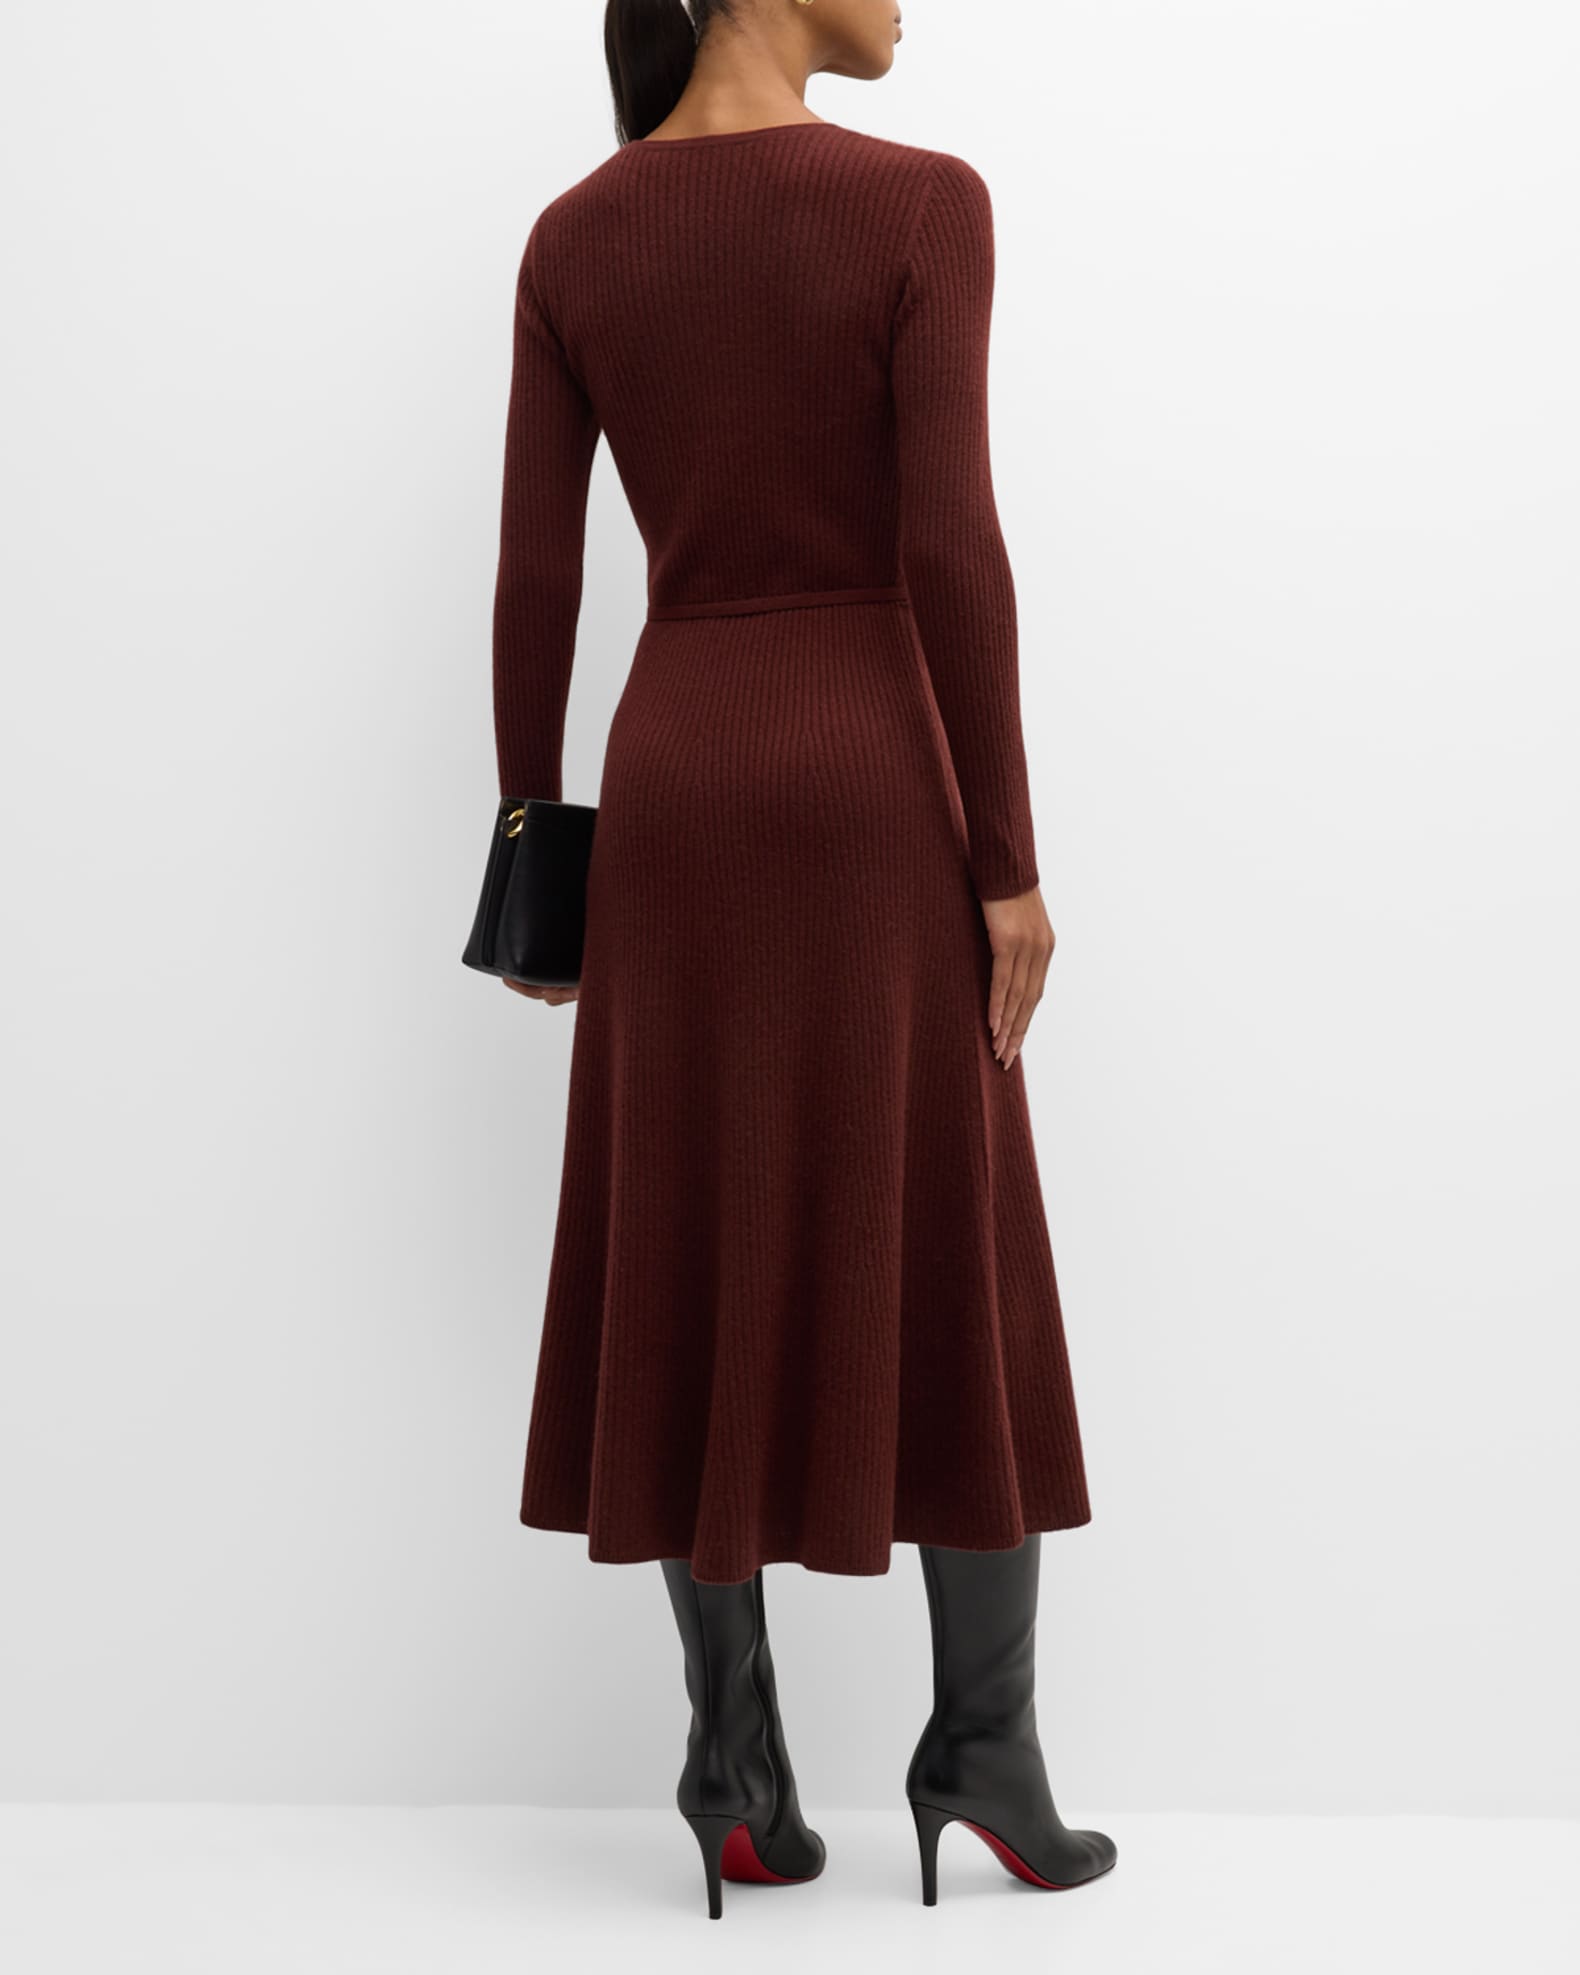 Elie Tahari The Leith Belted Cashmere Midi Sweater Dress | Neiman Marcus